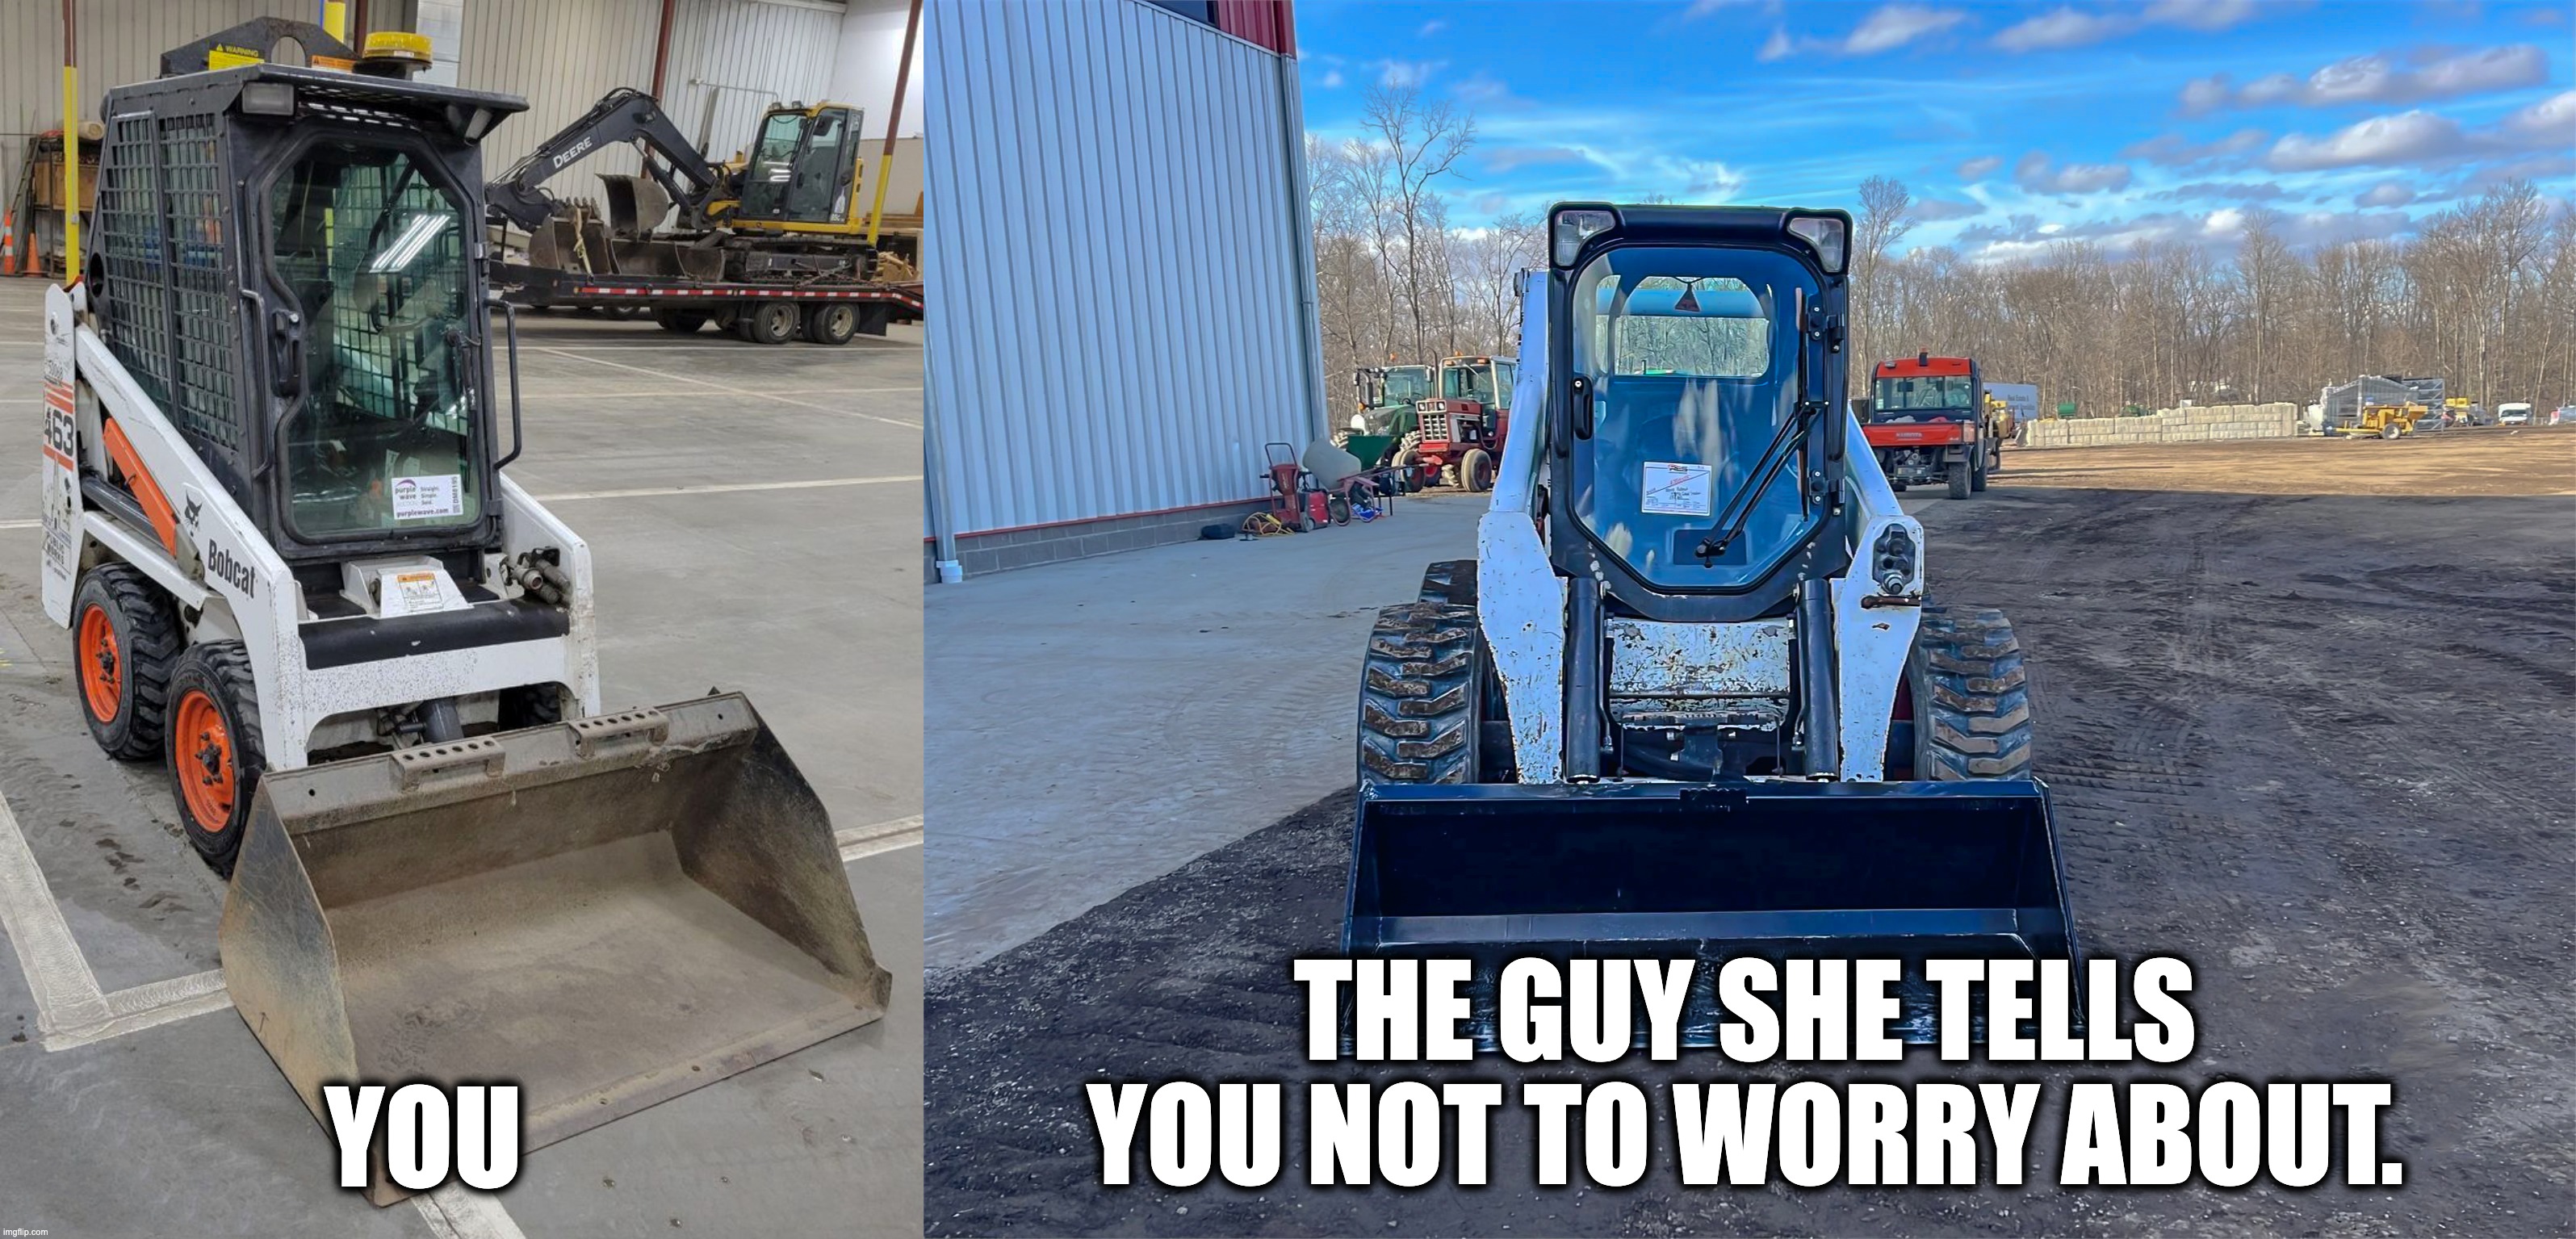 You vs. the guy she told you not to worry about | THE GUY SHE TELLS YOU NOT TO WORRY ABOUT. YOU | image tagged in funny,skidsteer,construction equipment,farm equipment | made w/ Imgflip meme maker